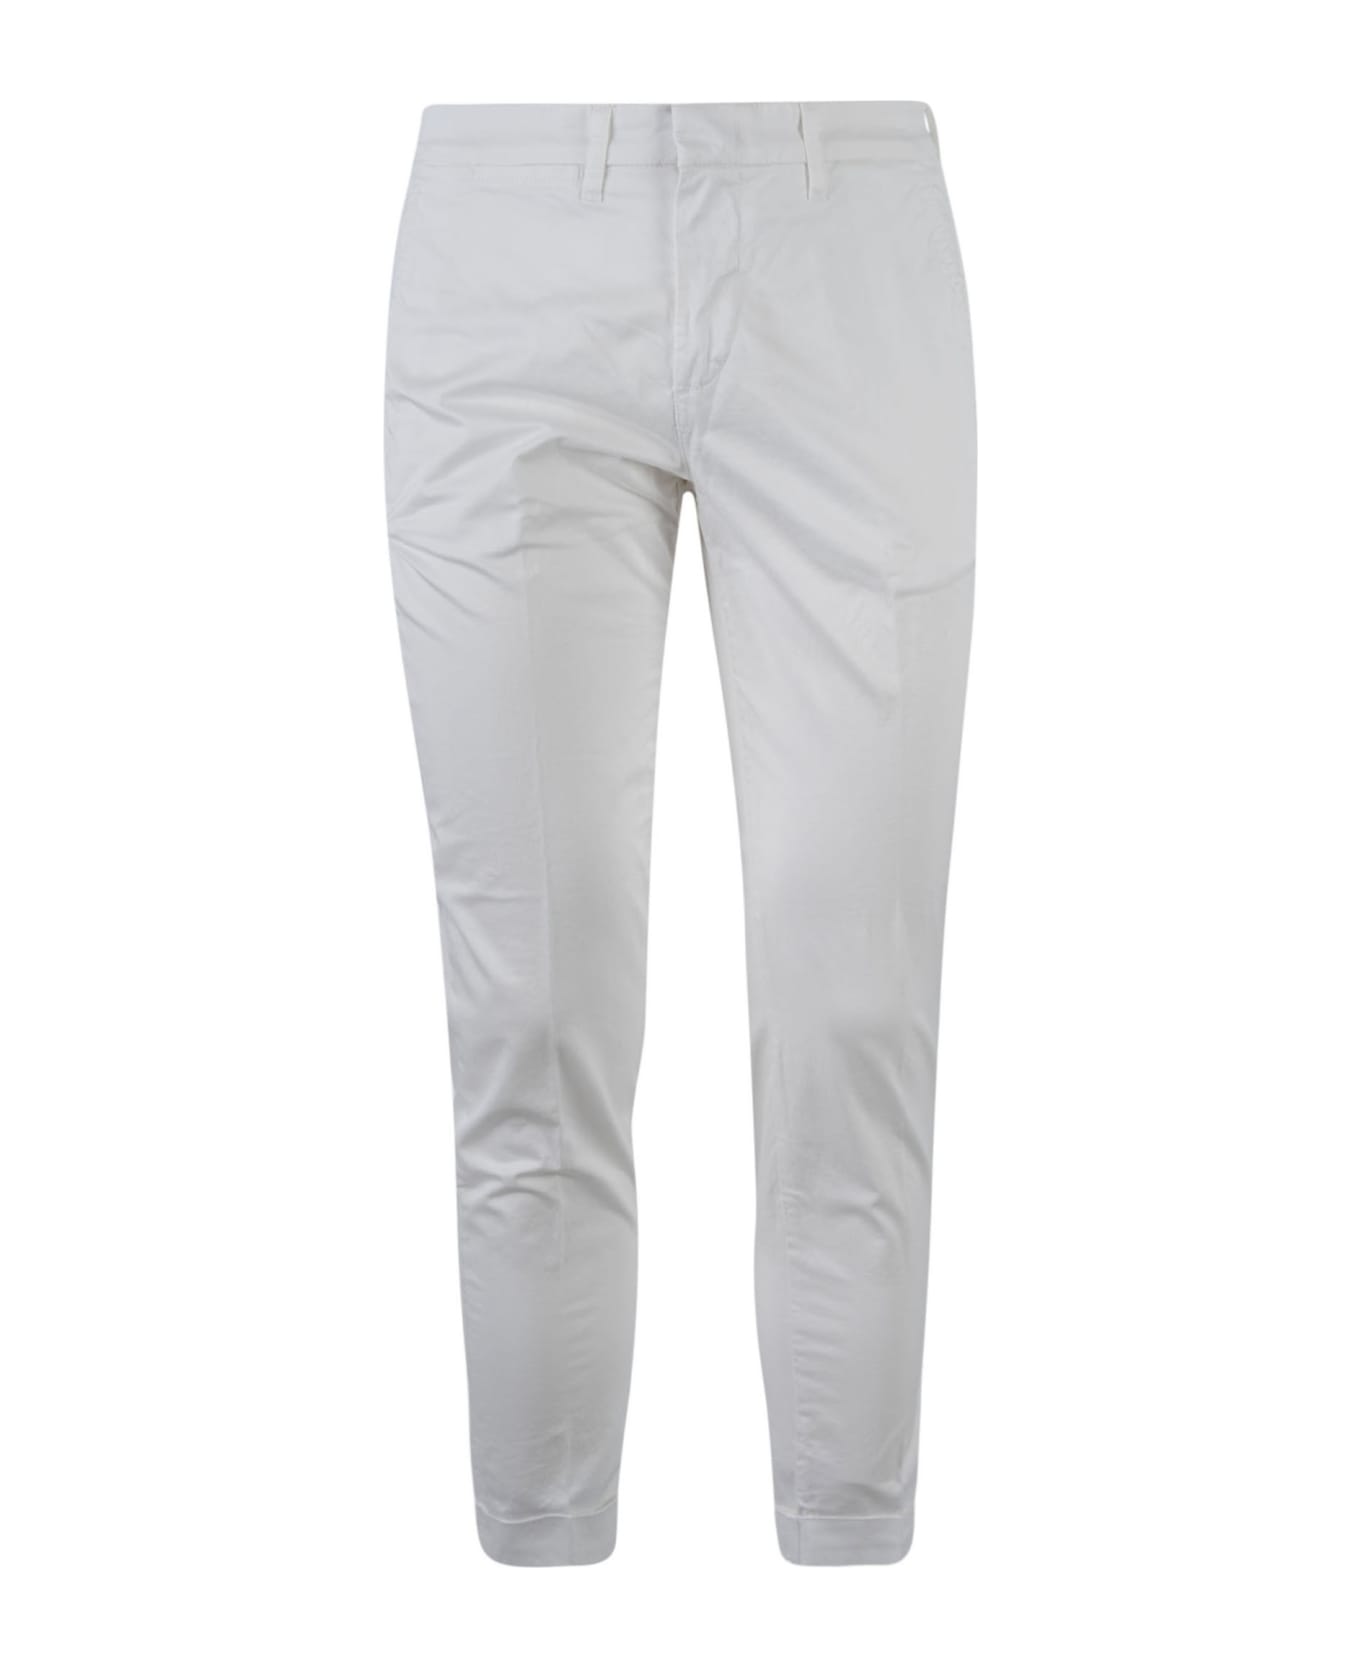 Fay Regular Fit Plain Trousers Fay - WHITE ボトムス